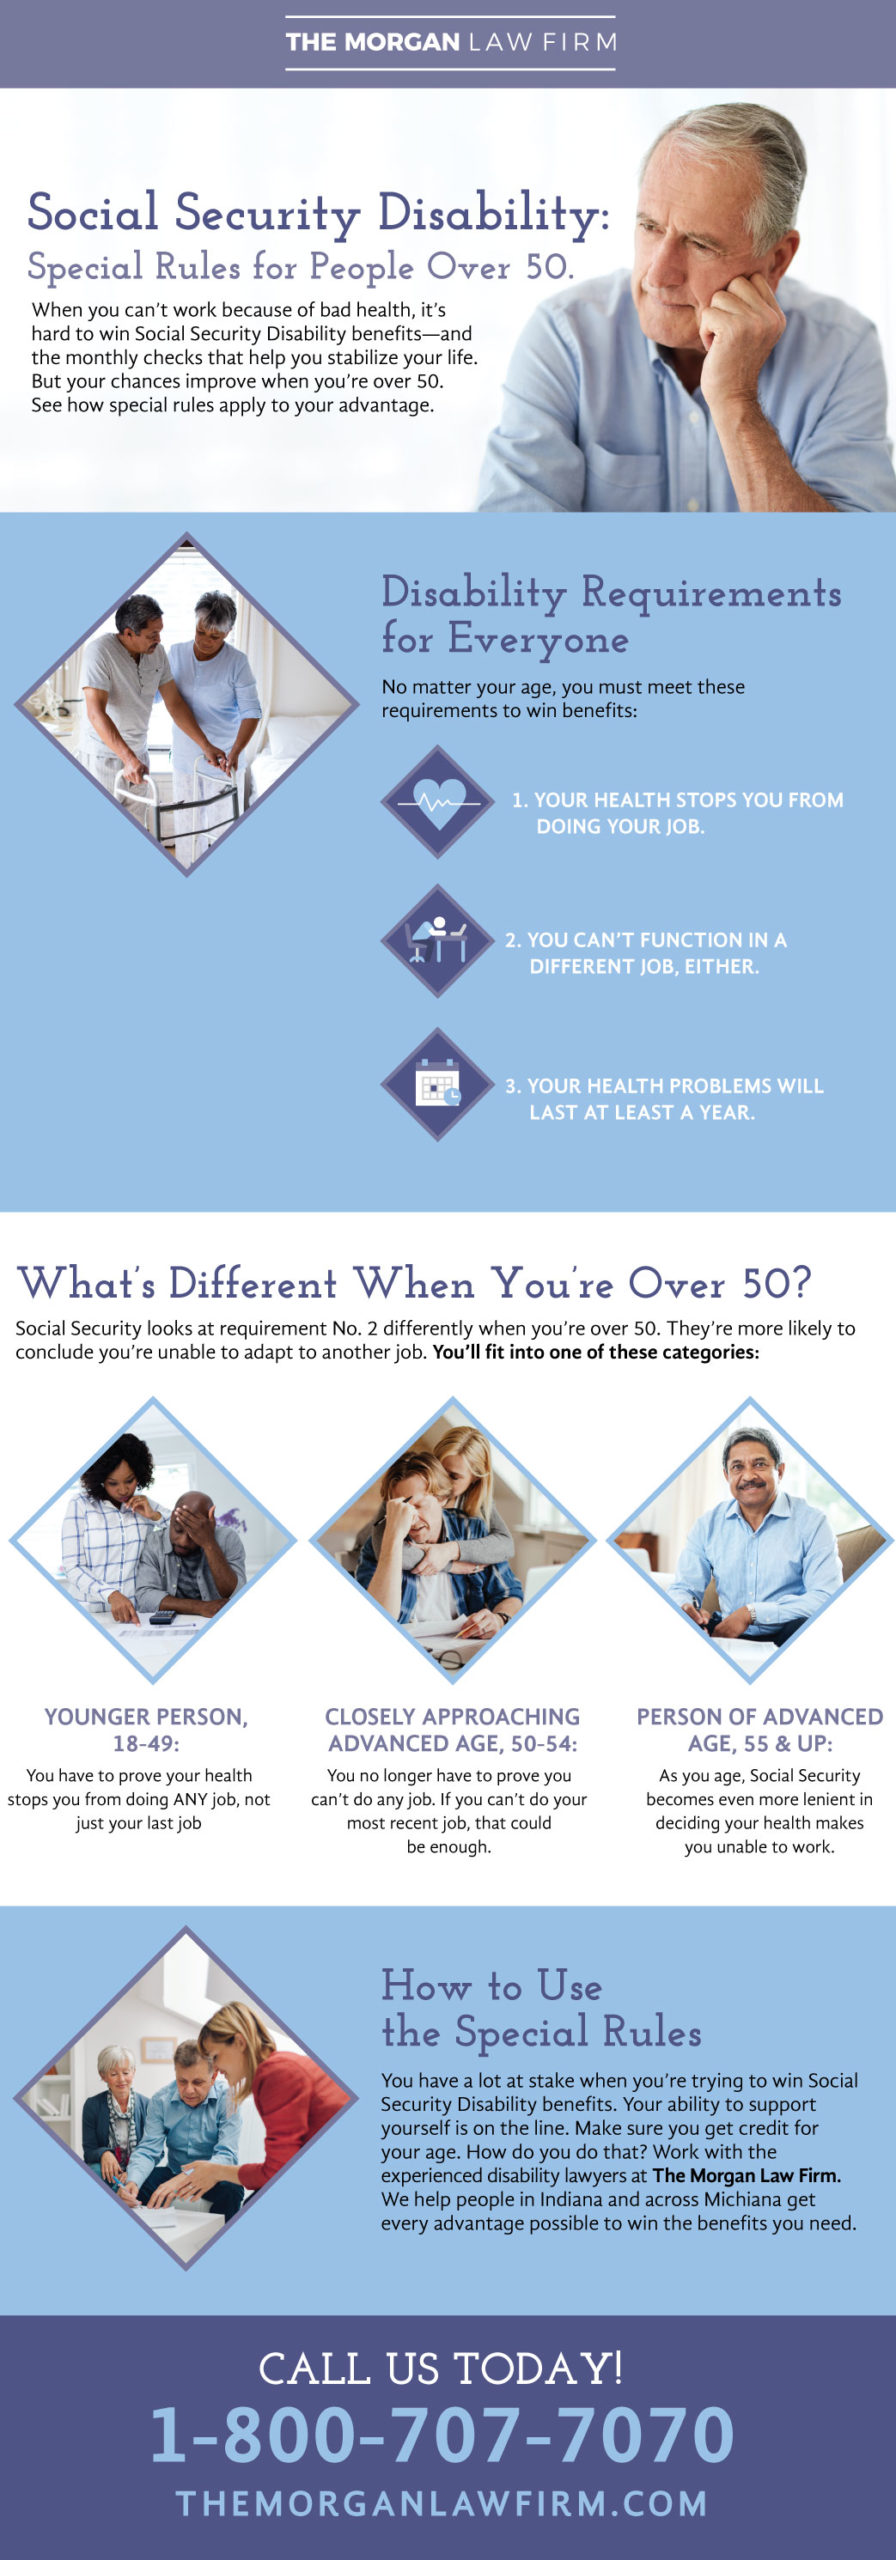 An infographic on special rules for social security disability benefits for people over the age of 50.